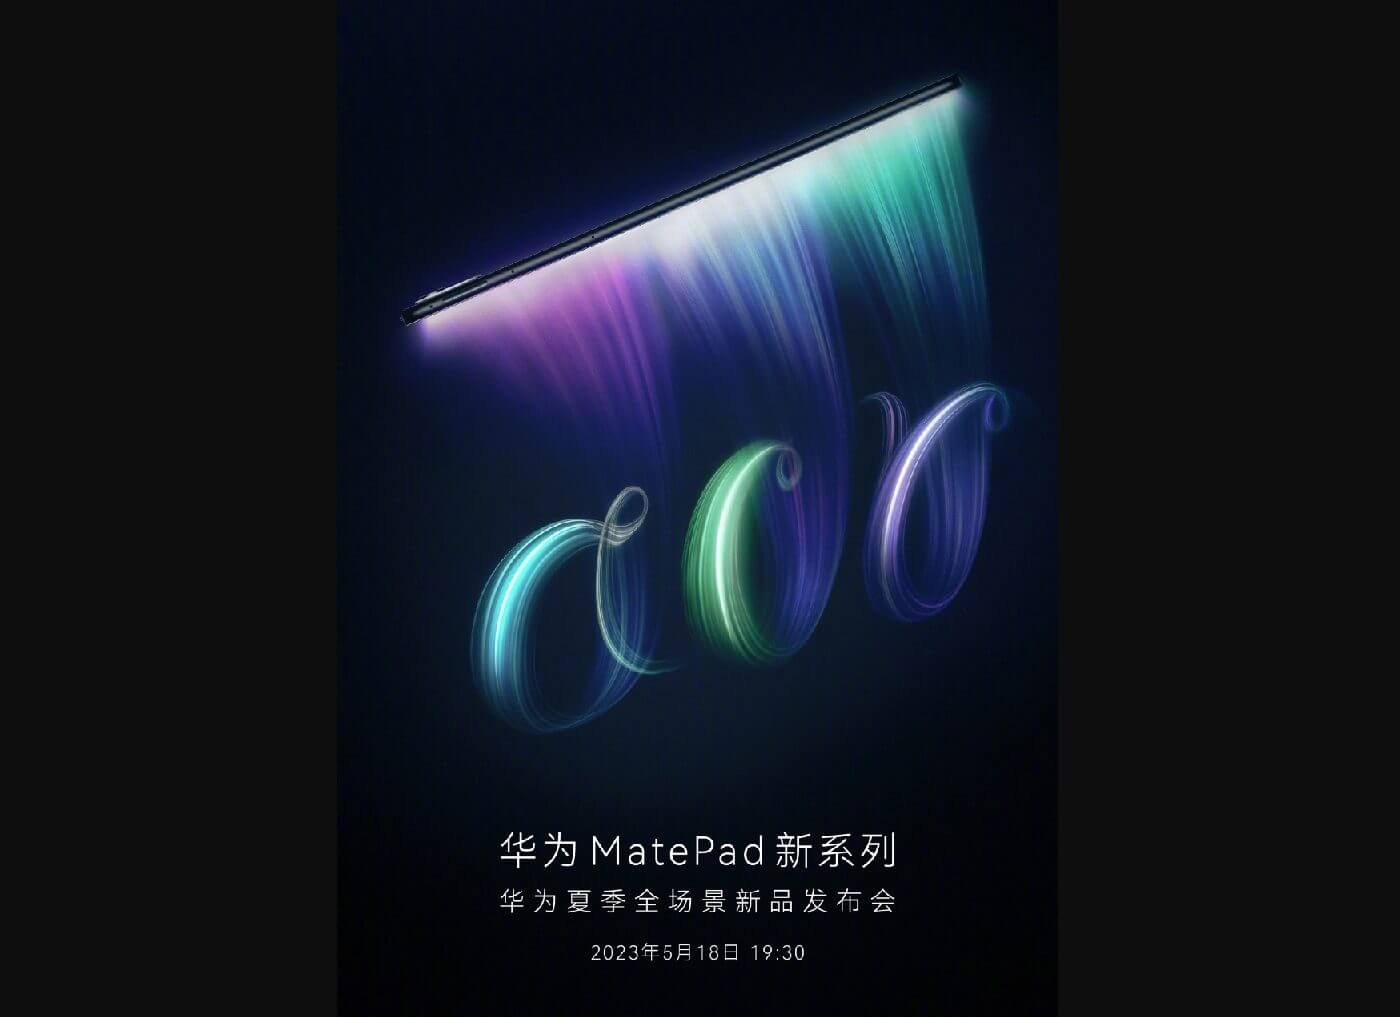 Huawei MatePad Air series tablets set for launch on May 18 - Good e-Reader